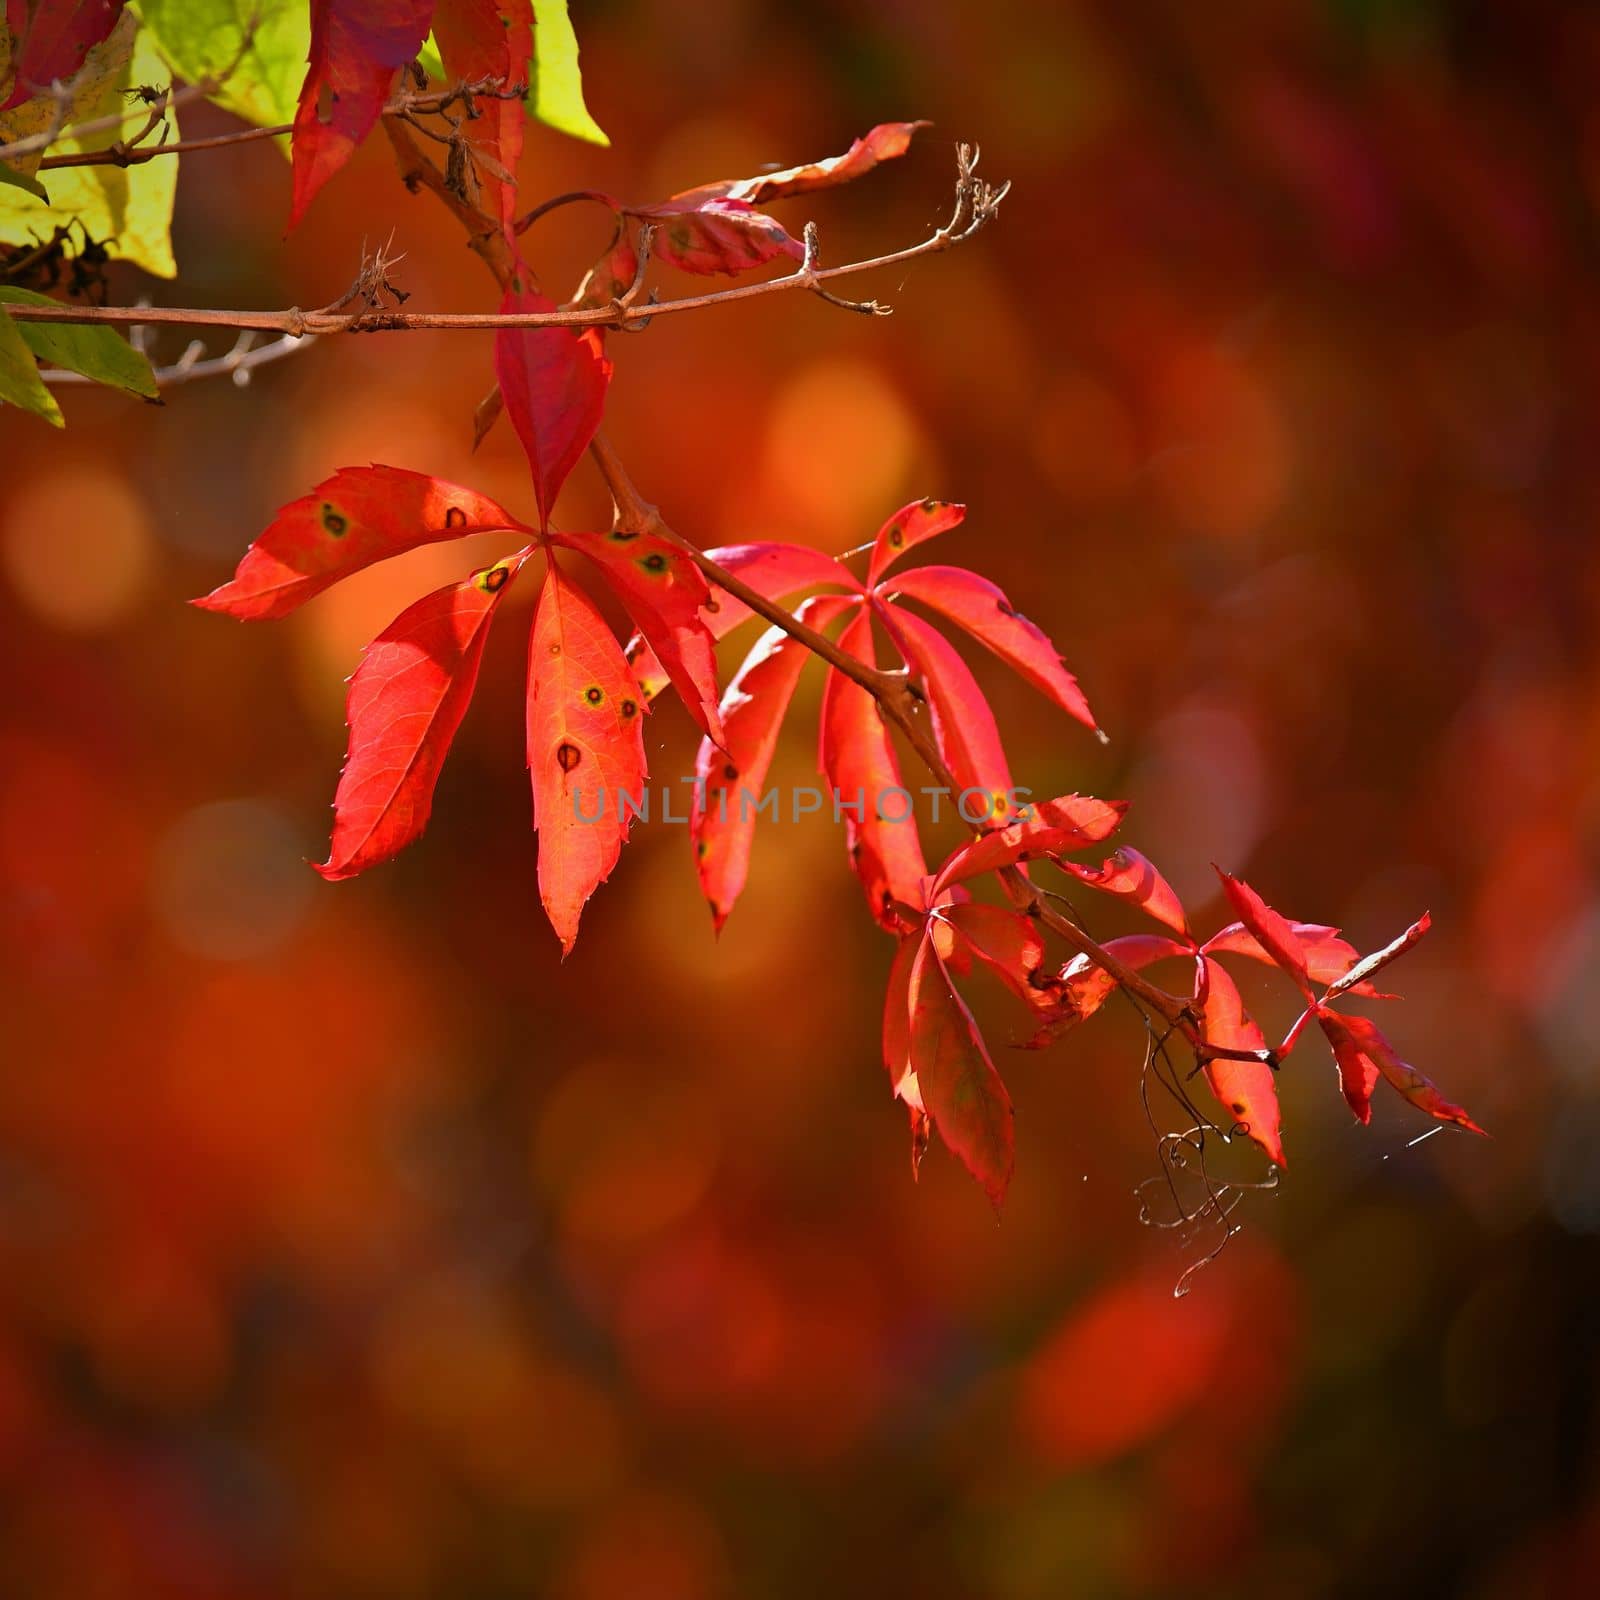  Red leaf. Autumn background. Beautiful colorful leaves from a tree. Fall time in the nature.